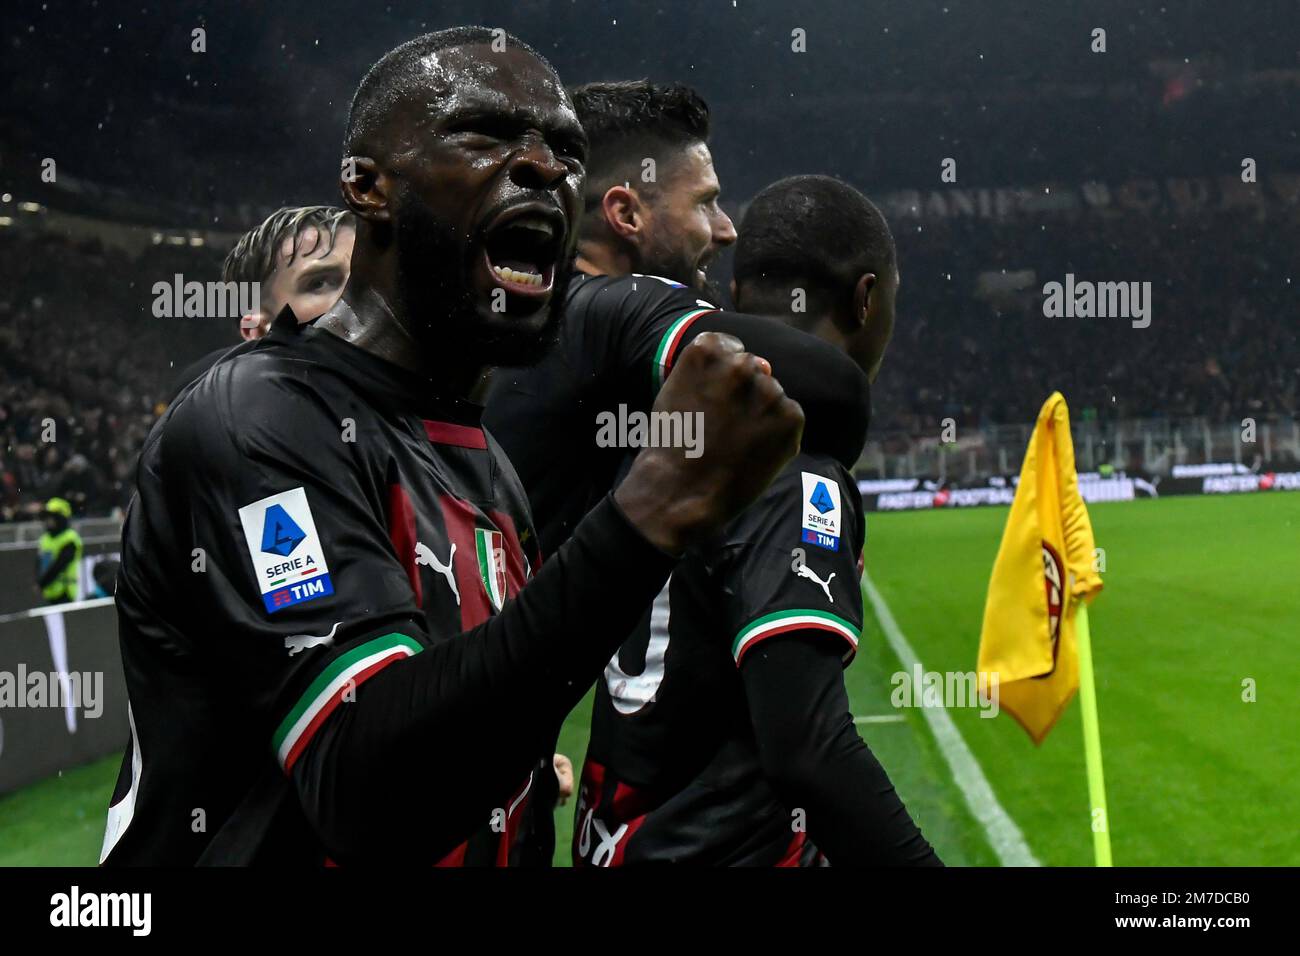 Fikayo Tomori of AC Milan celebrates after Pierre Kalulu (not pictured) scored the goal of 1-0 during the Serie A football match between AC Milan and Stock Photo